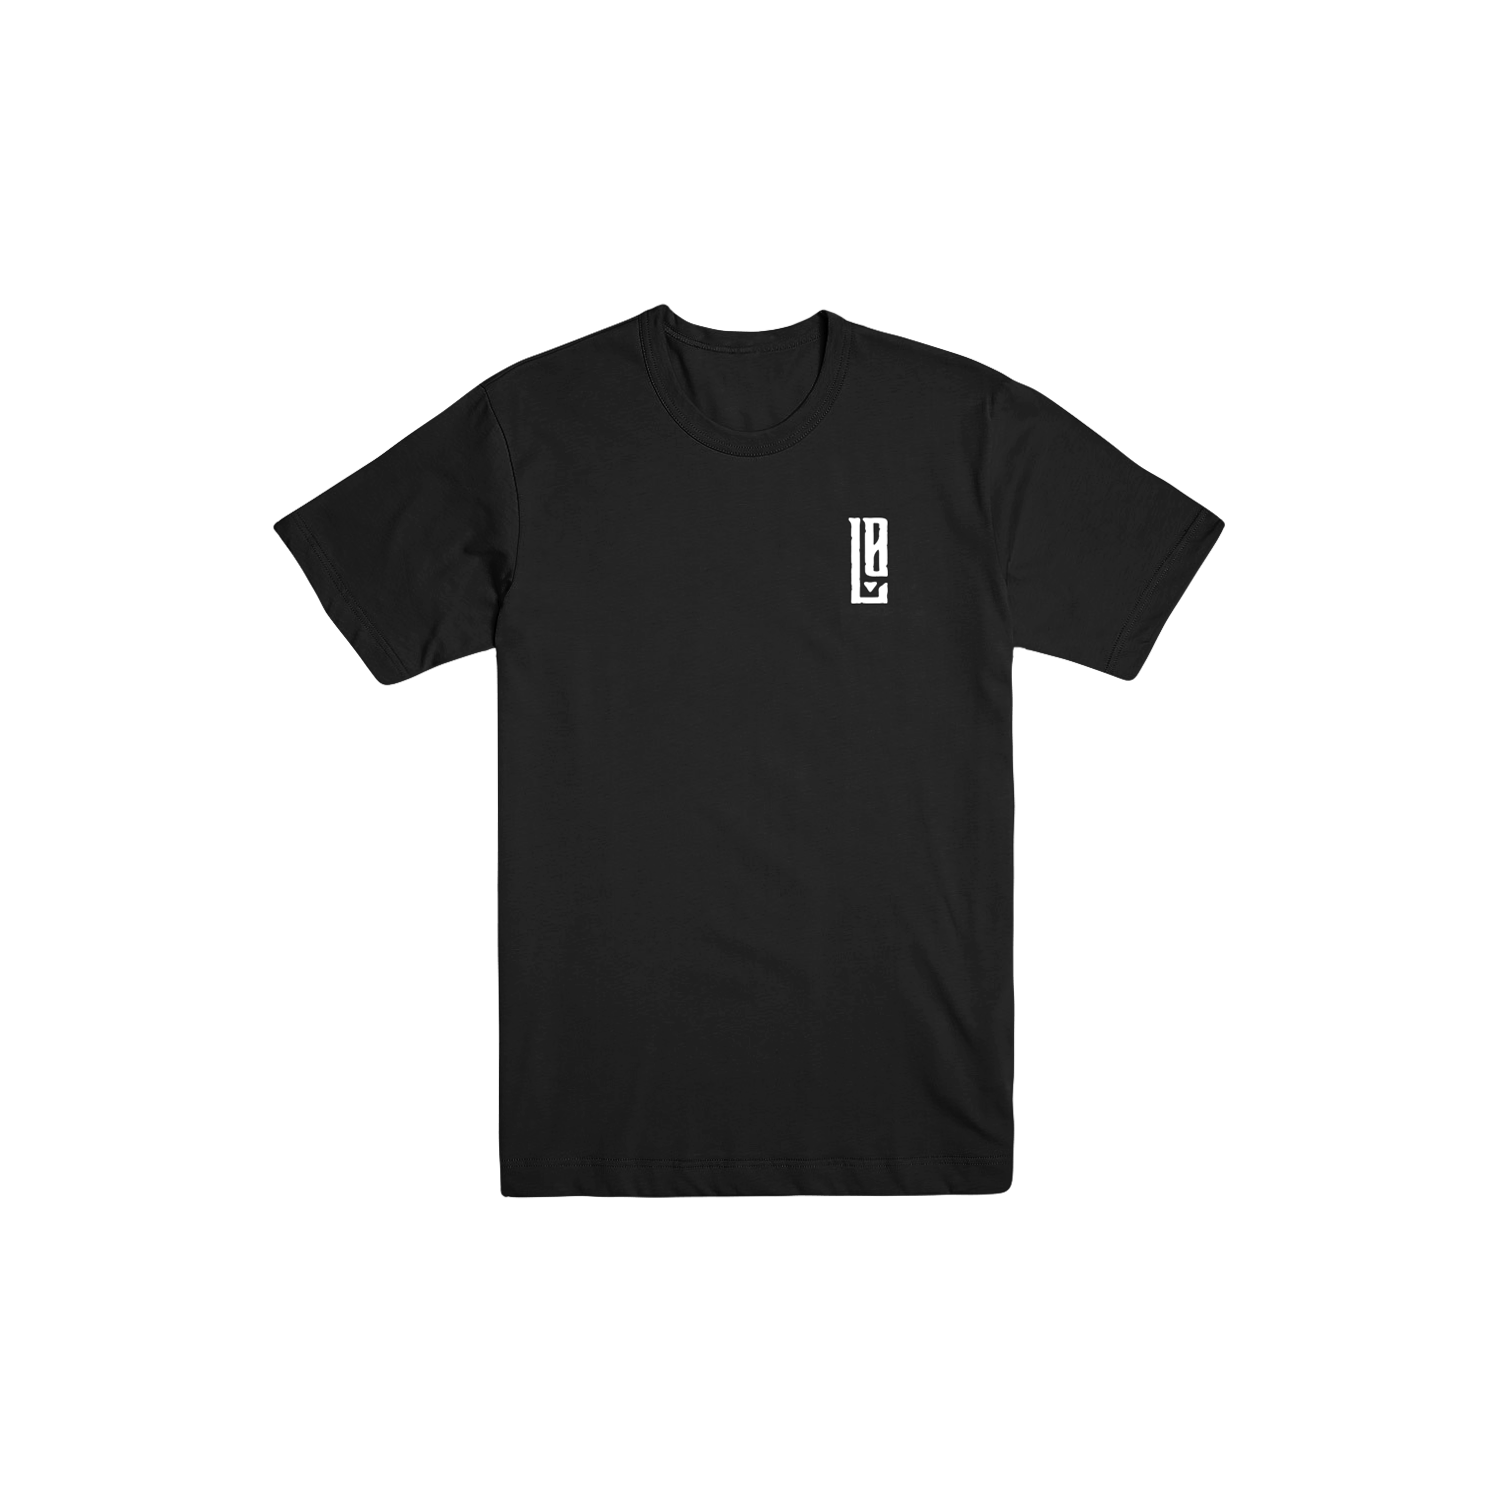 Holy Ghosted Tee